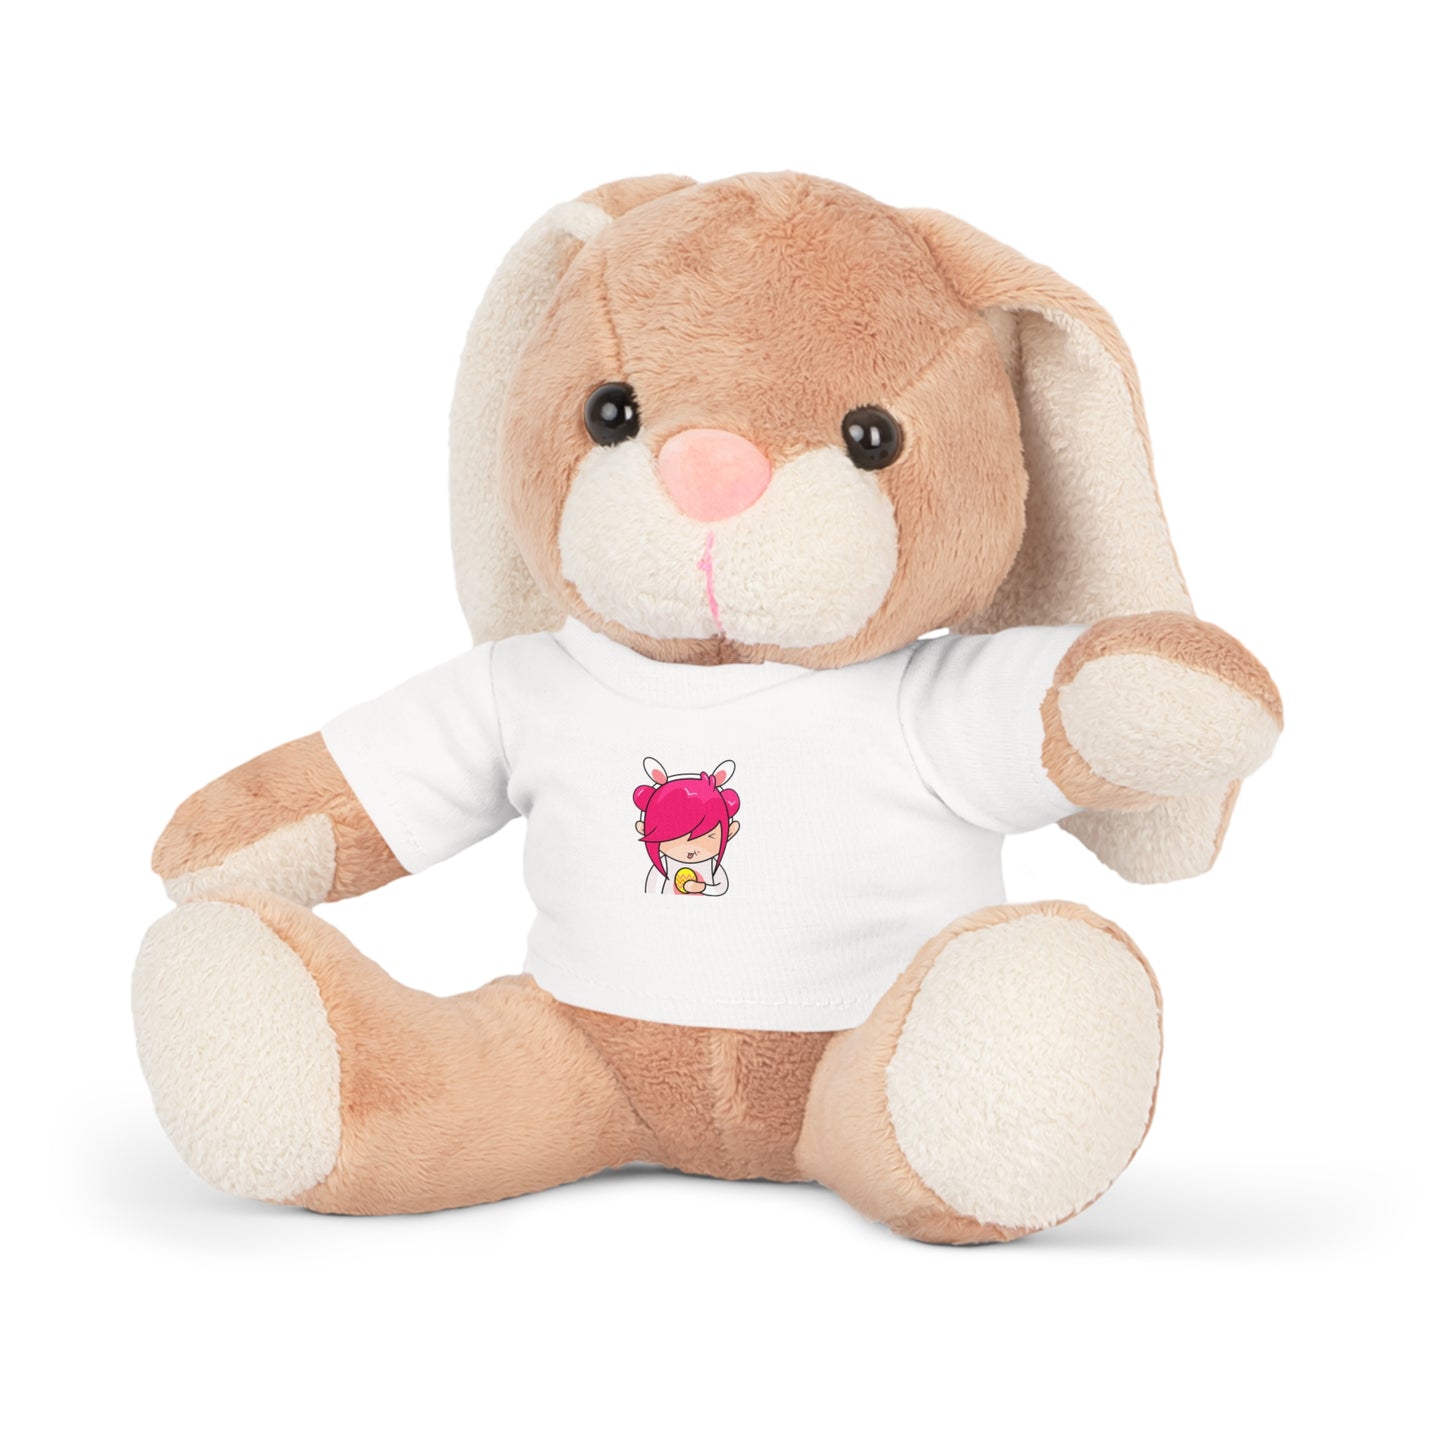 Plush Bunny with T-Shirt